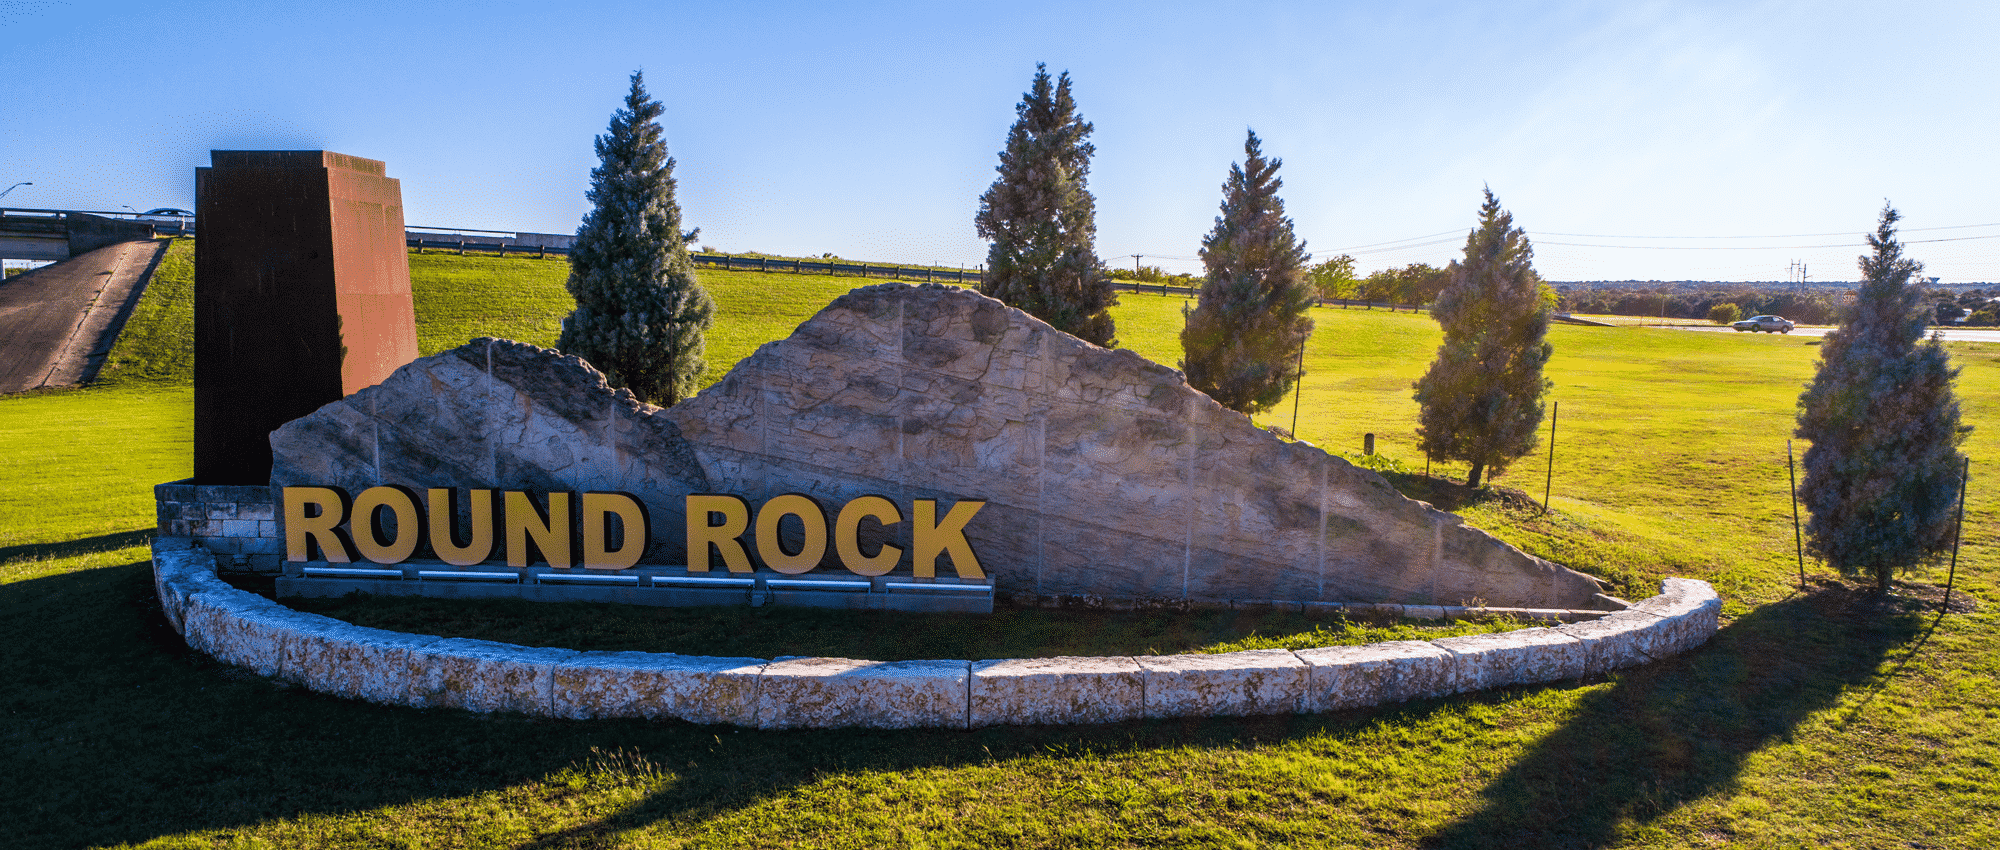 City entrance display for Round Rock, Texas